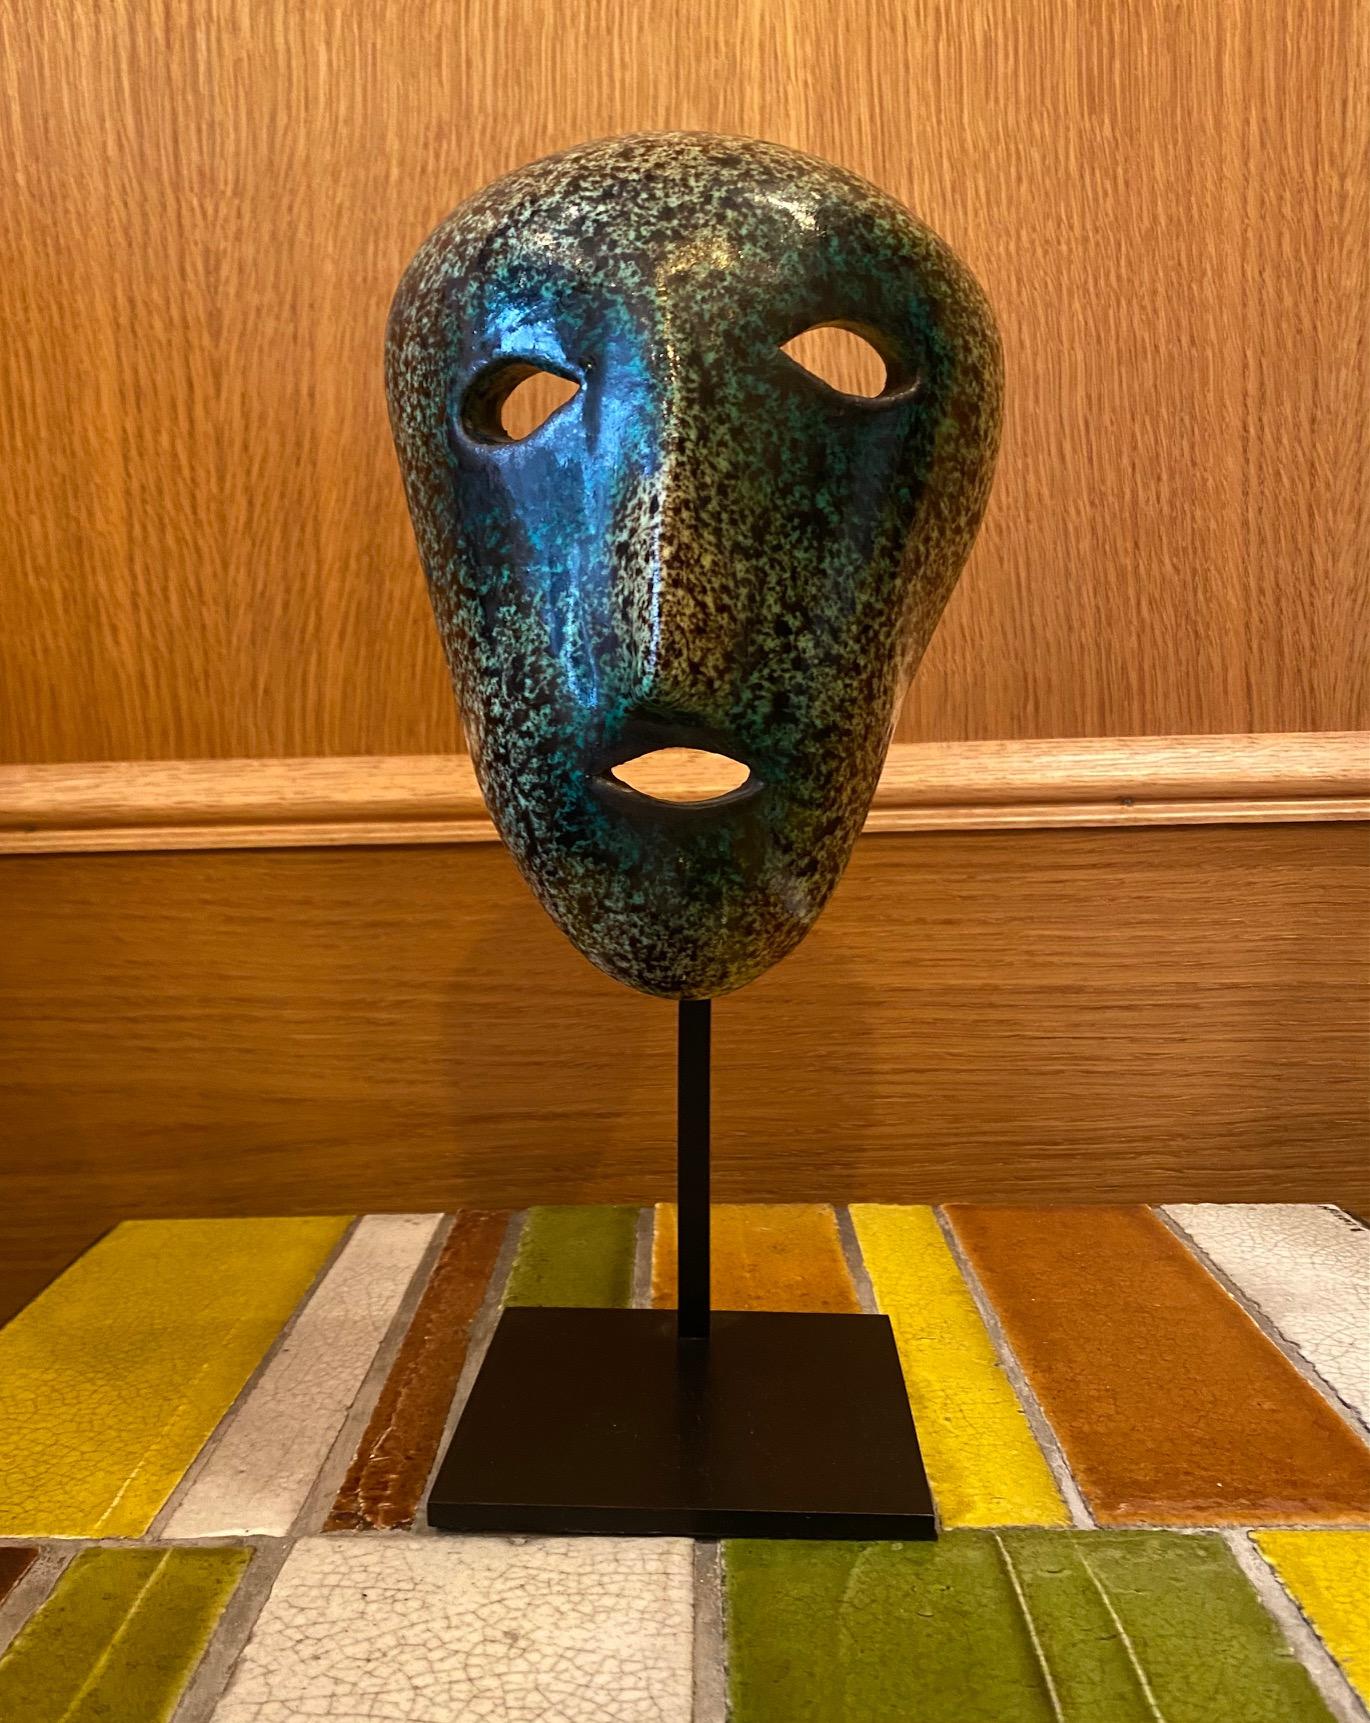 Ceramic Mask, Accolay, France, 1960s
Accolay was a pottery center in France, north of Burgundy, founded amongst others, by 4 students of Alexandre Kostanda. Active between 1945 and 1989.

Dimensions indicated are with the pedestal